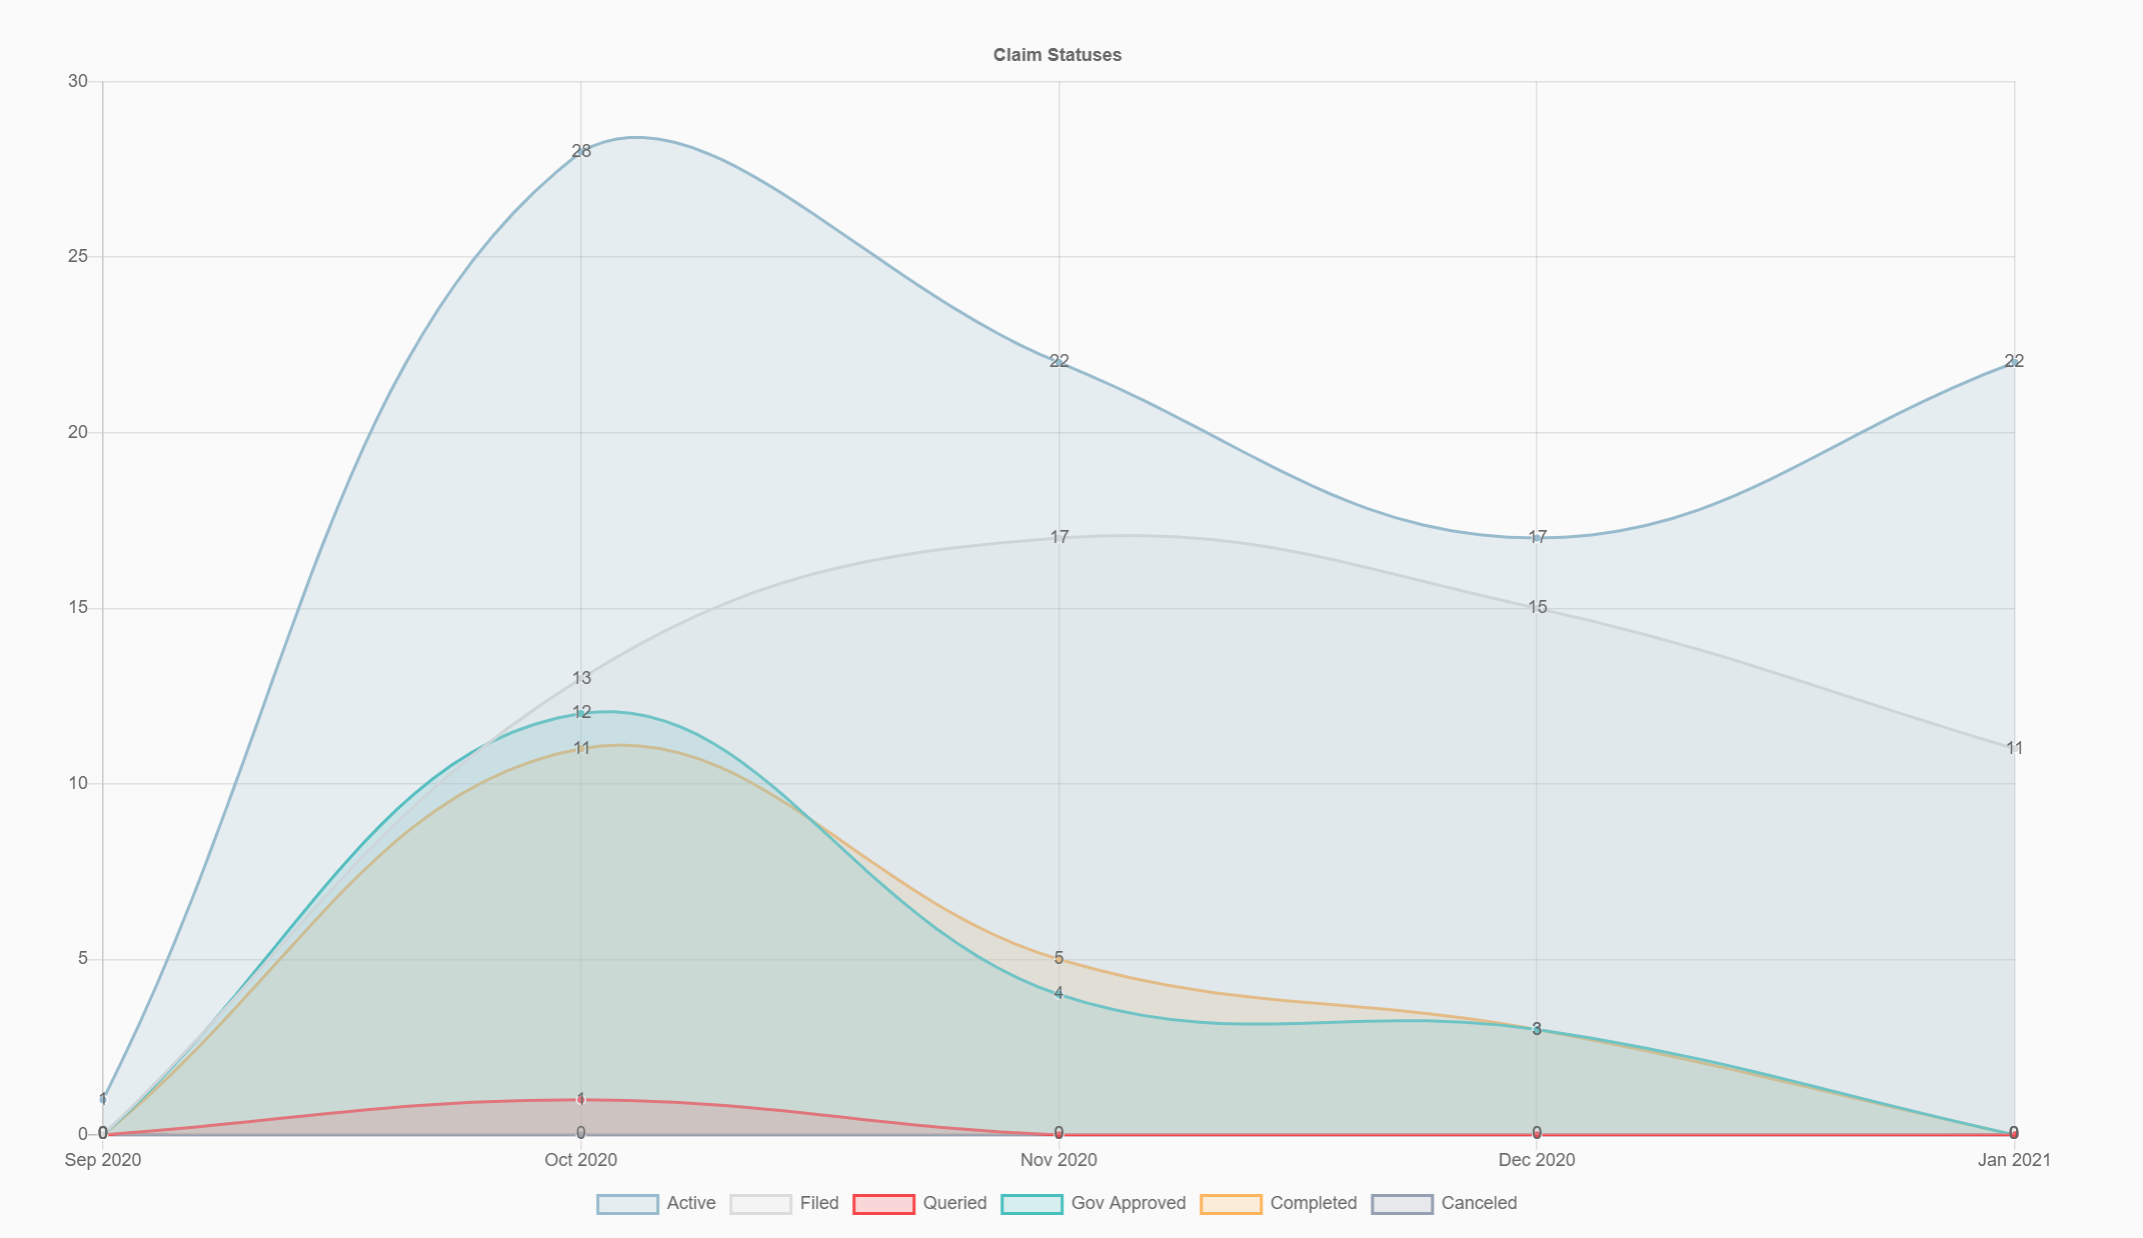 Admin analytics: Month by month snapshot of the performance of the R&D services. Claim Statuses